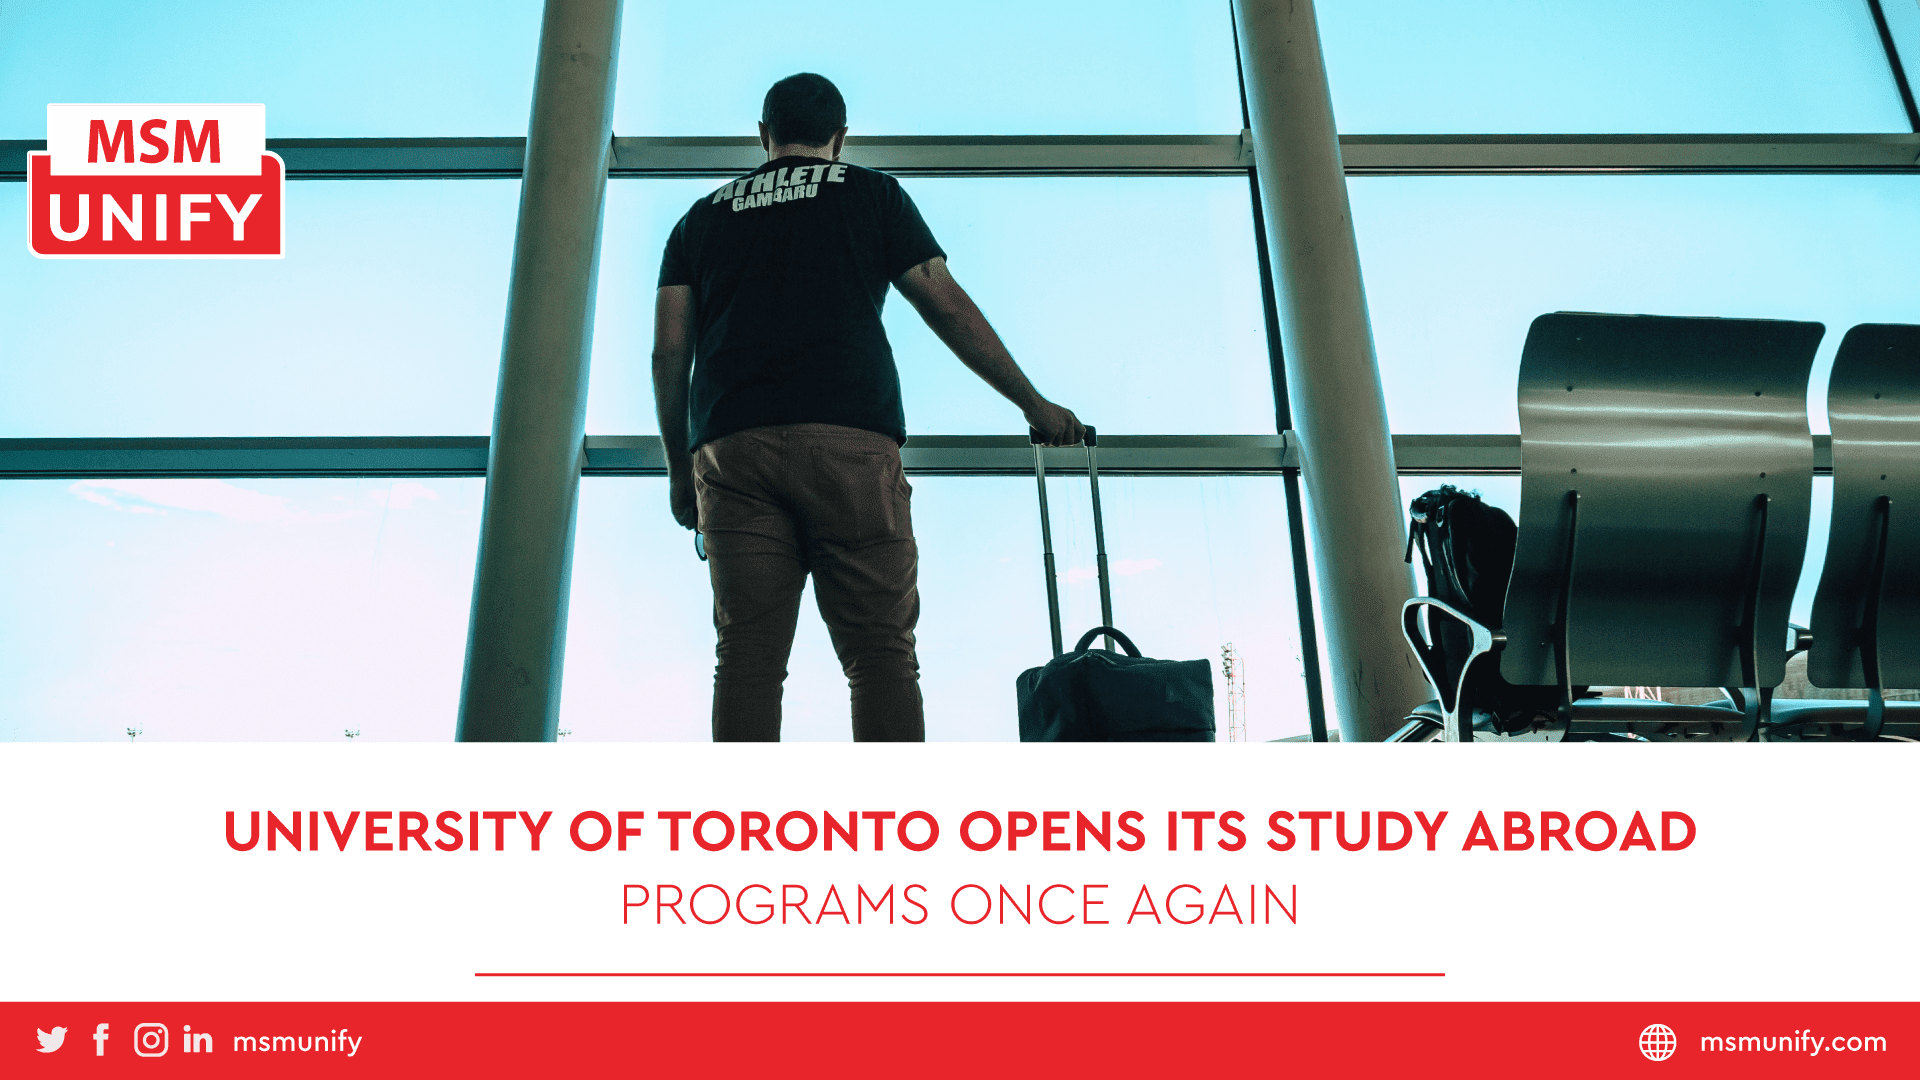 MSM Unify University of Toronto Opens its Study Abroad Programs Once Again